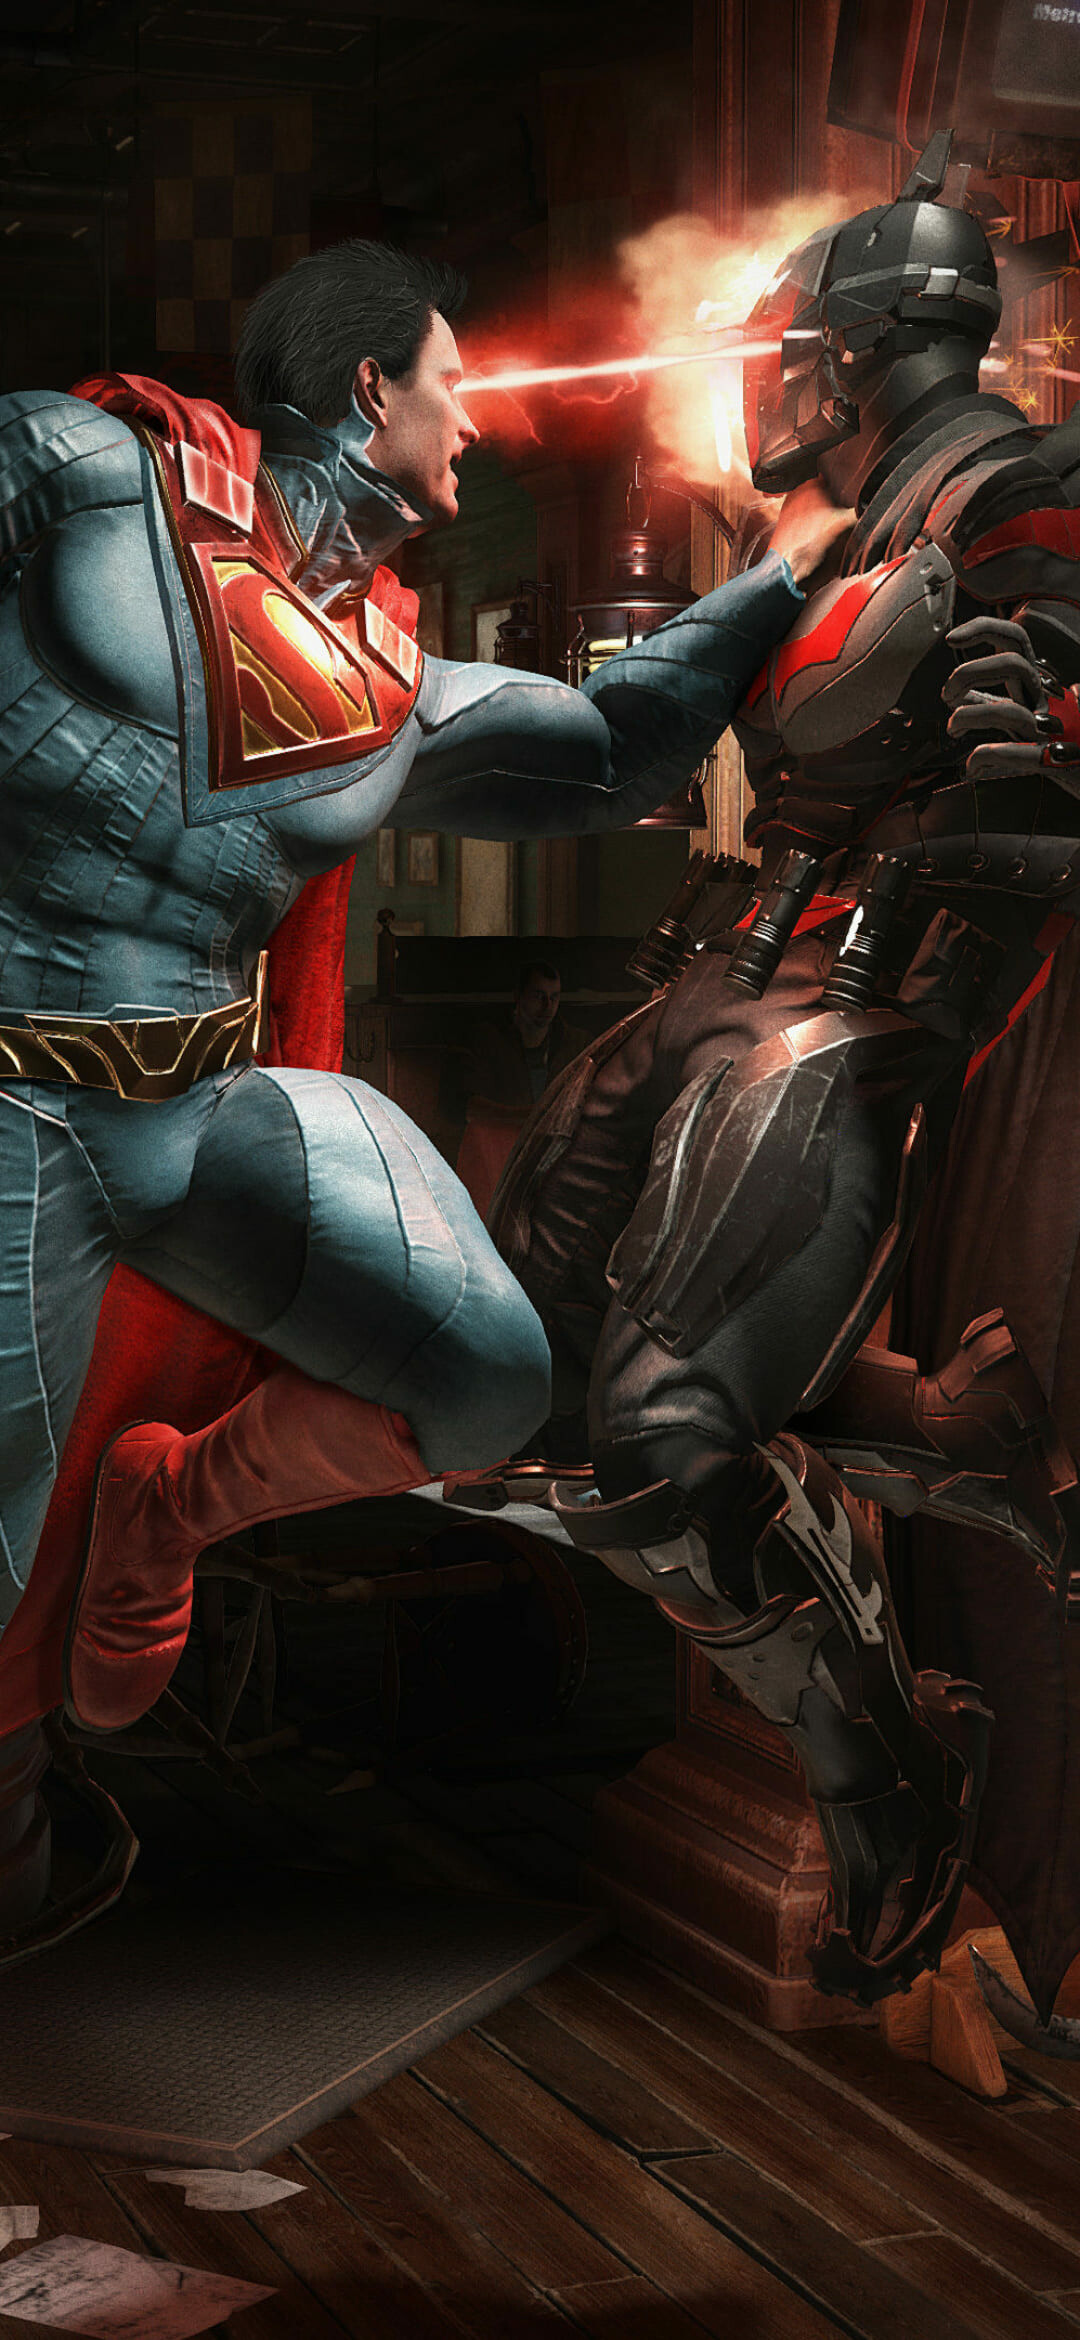 Injustice, Desktop wallpapers, Mobile backgrounds, High-quality images, 1080x2340 HD Phone